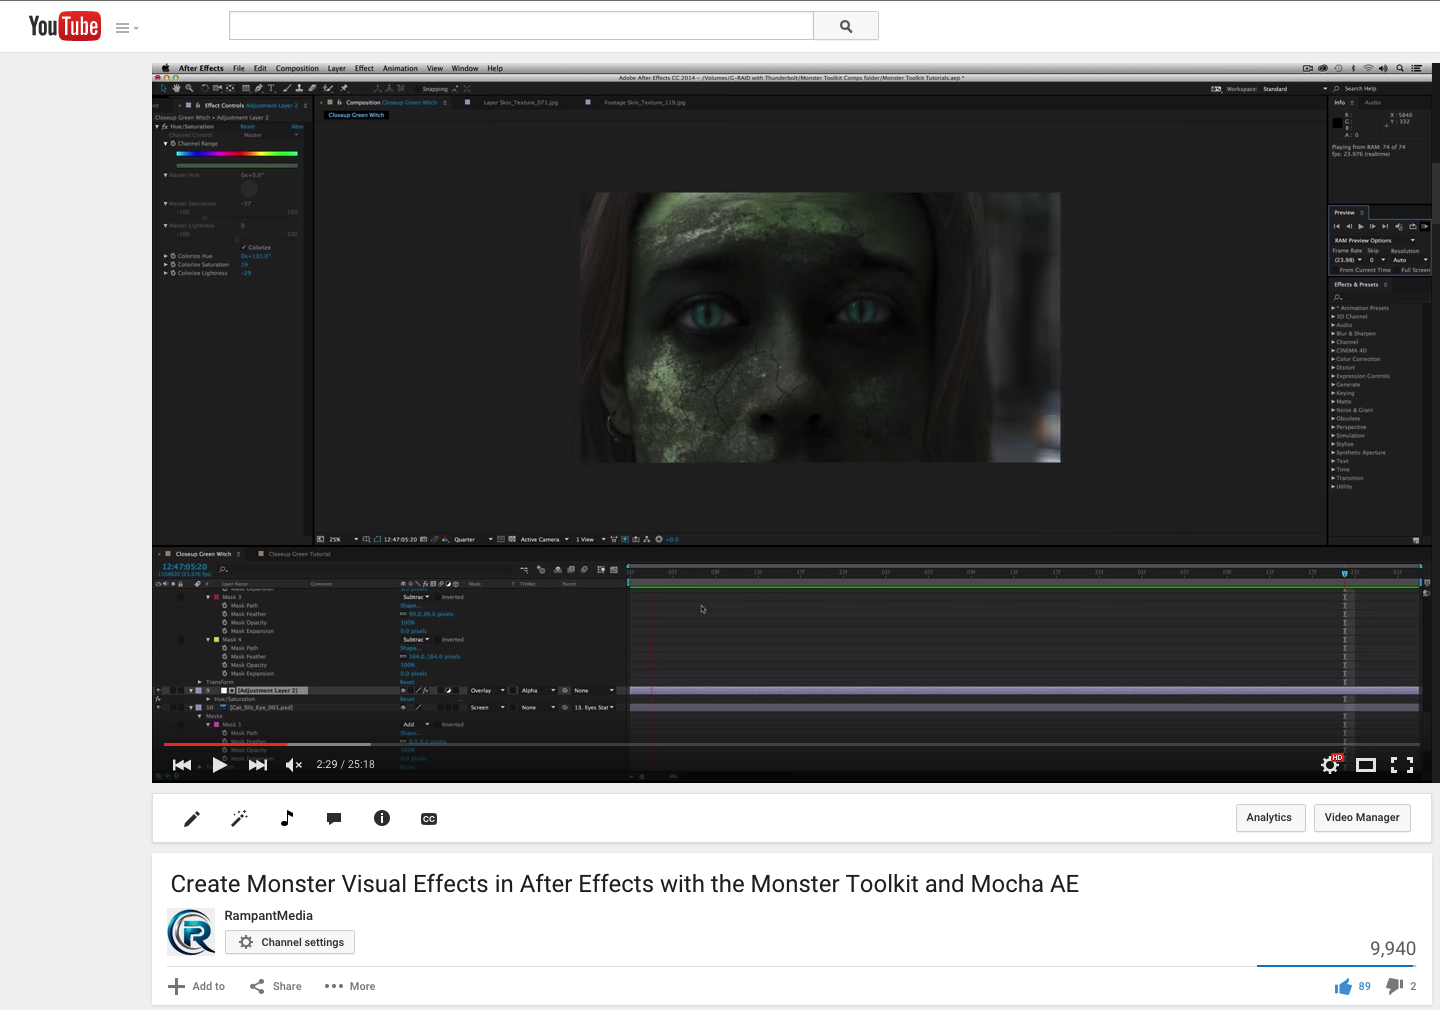 Create Monster Visual Effects in After Effects with the Monster Toolkit and Mocha AE